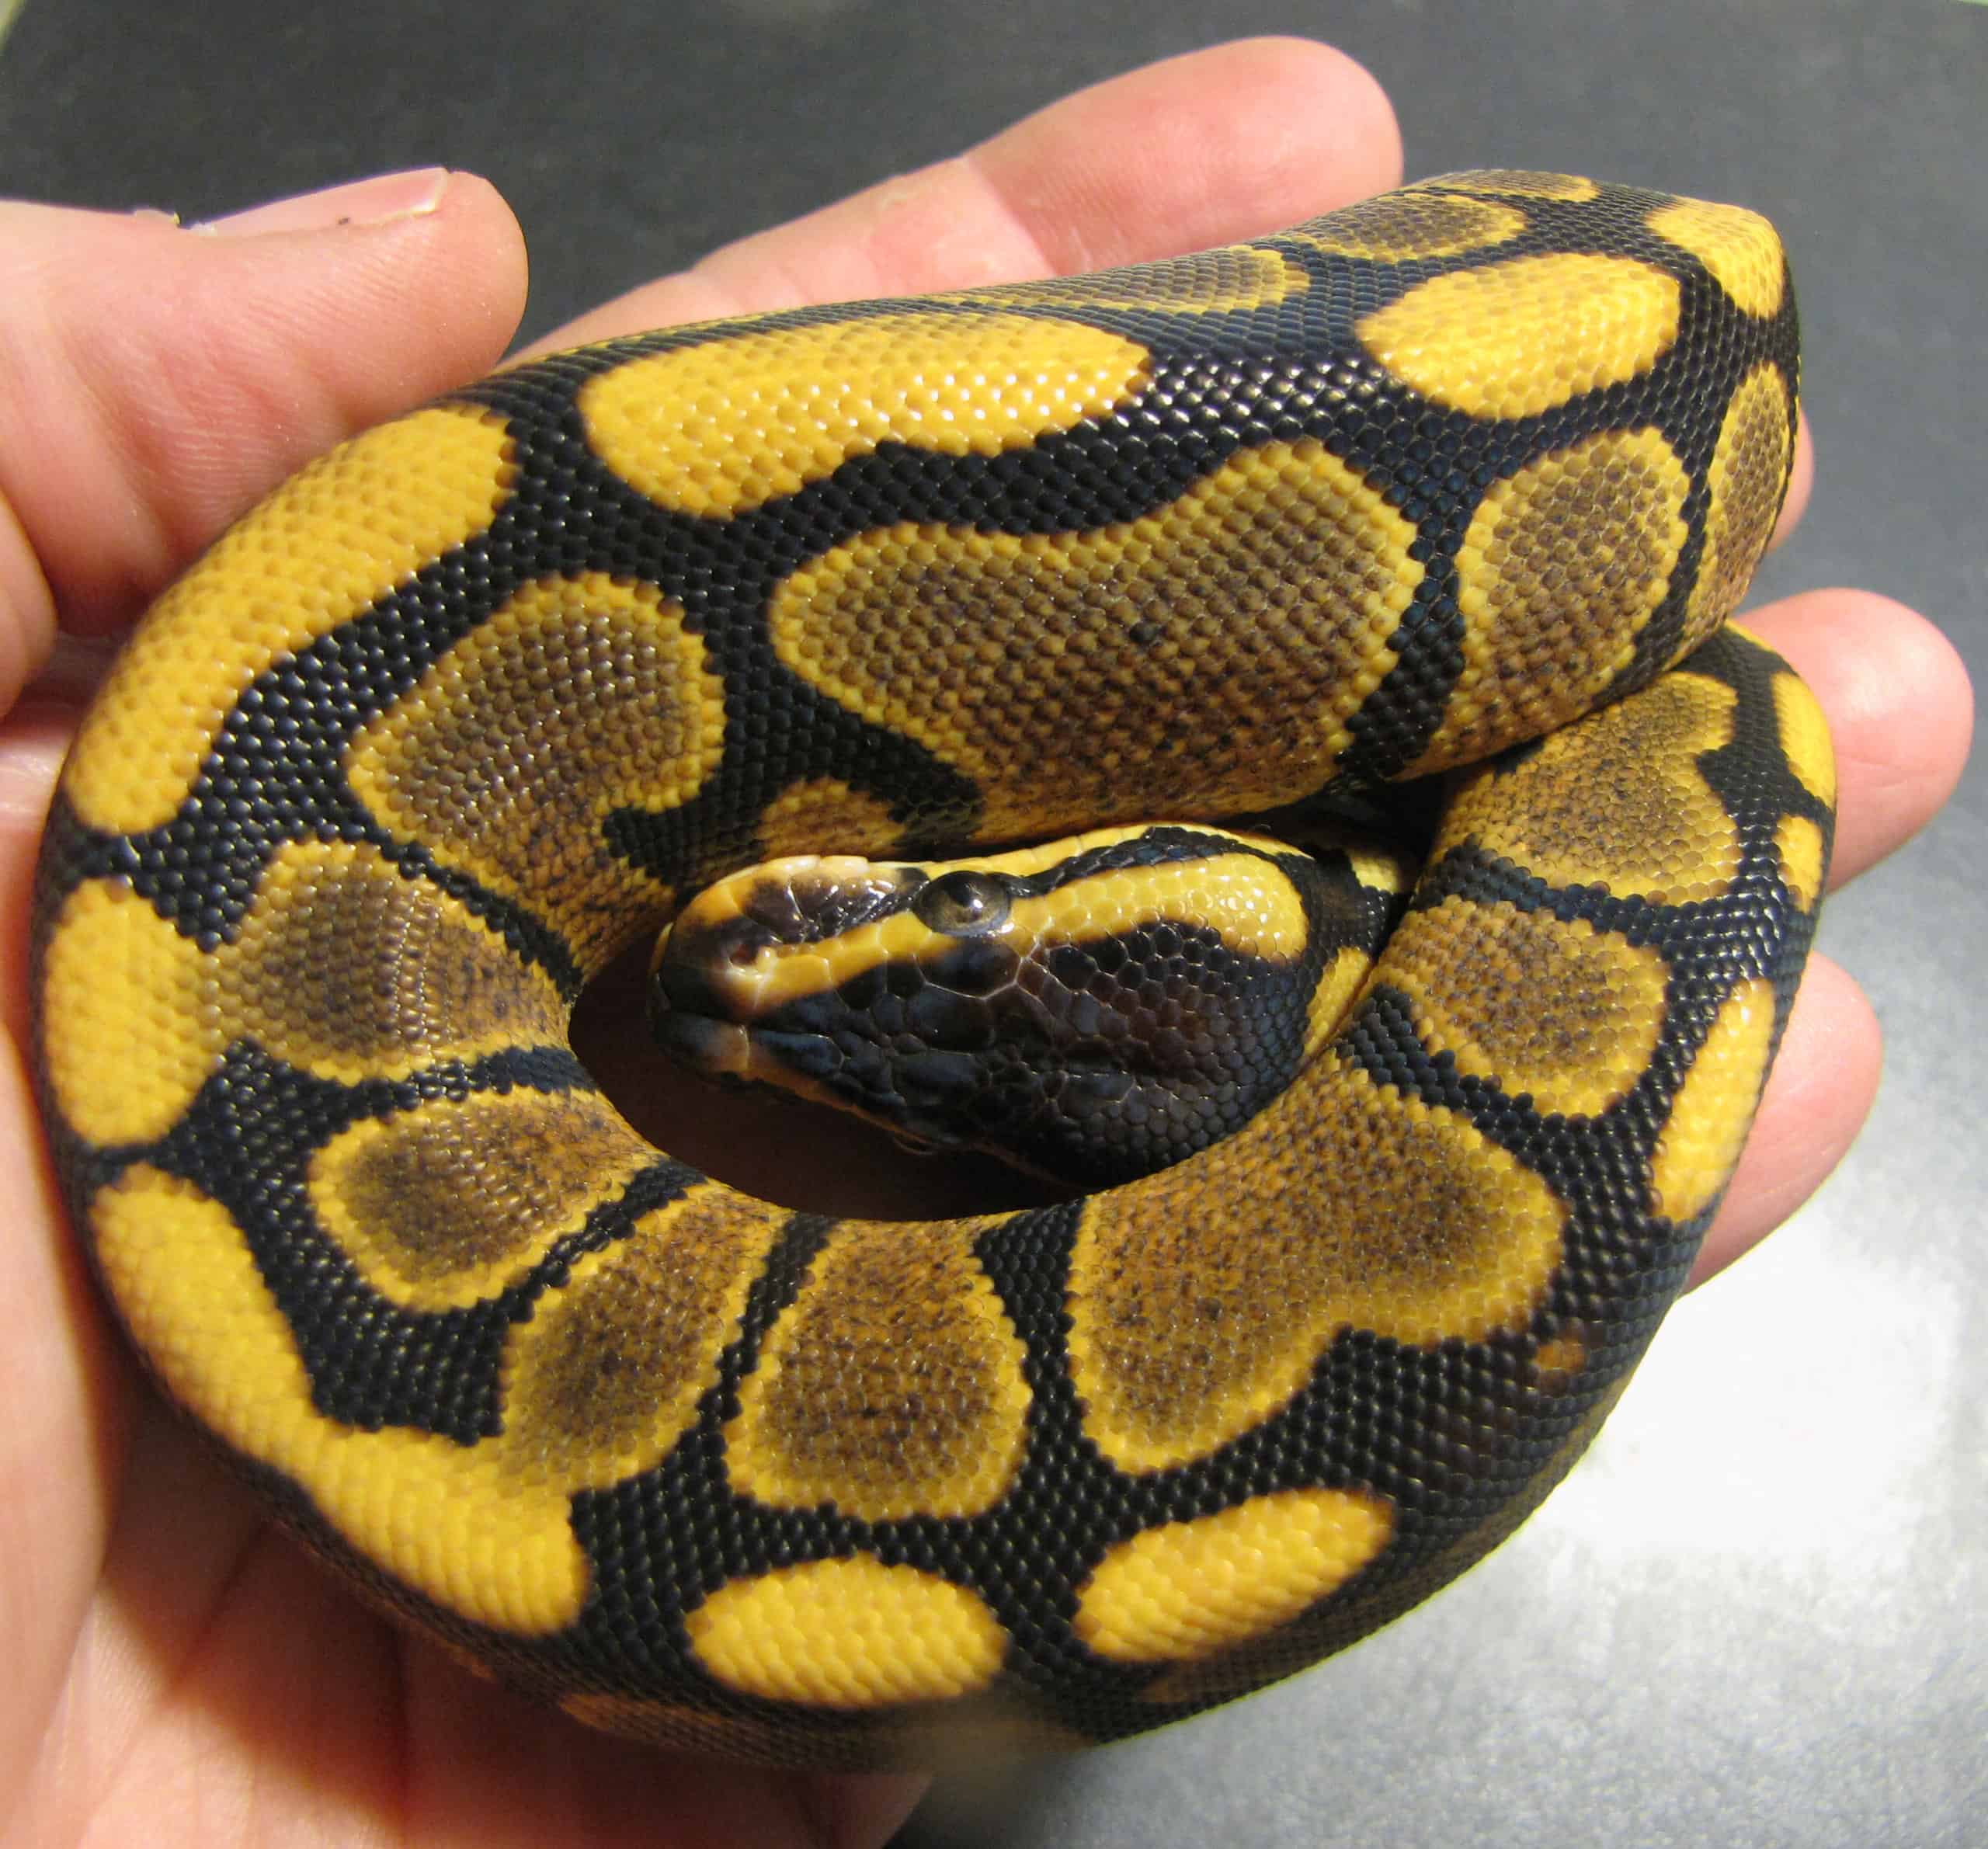 baby yellow belly ball python